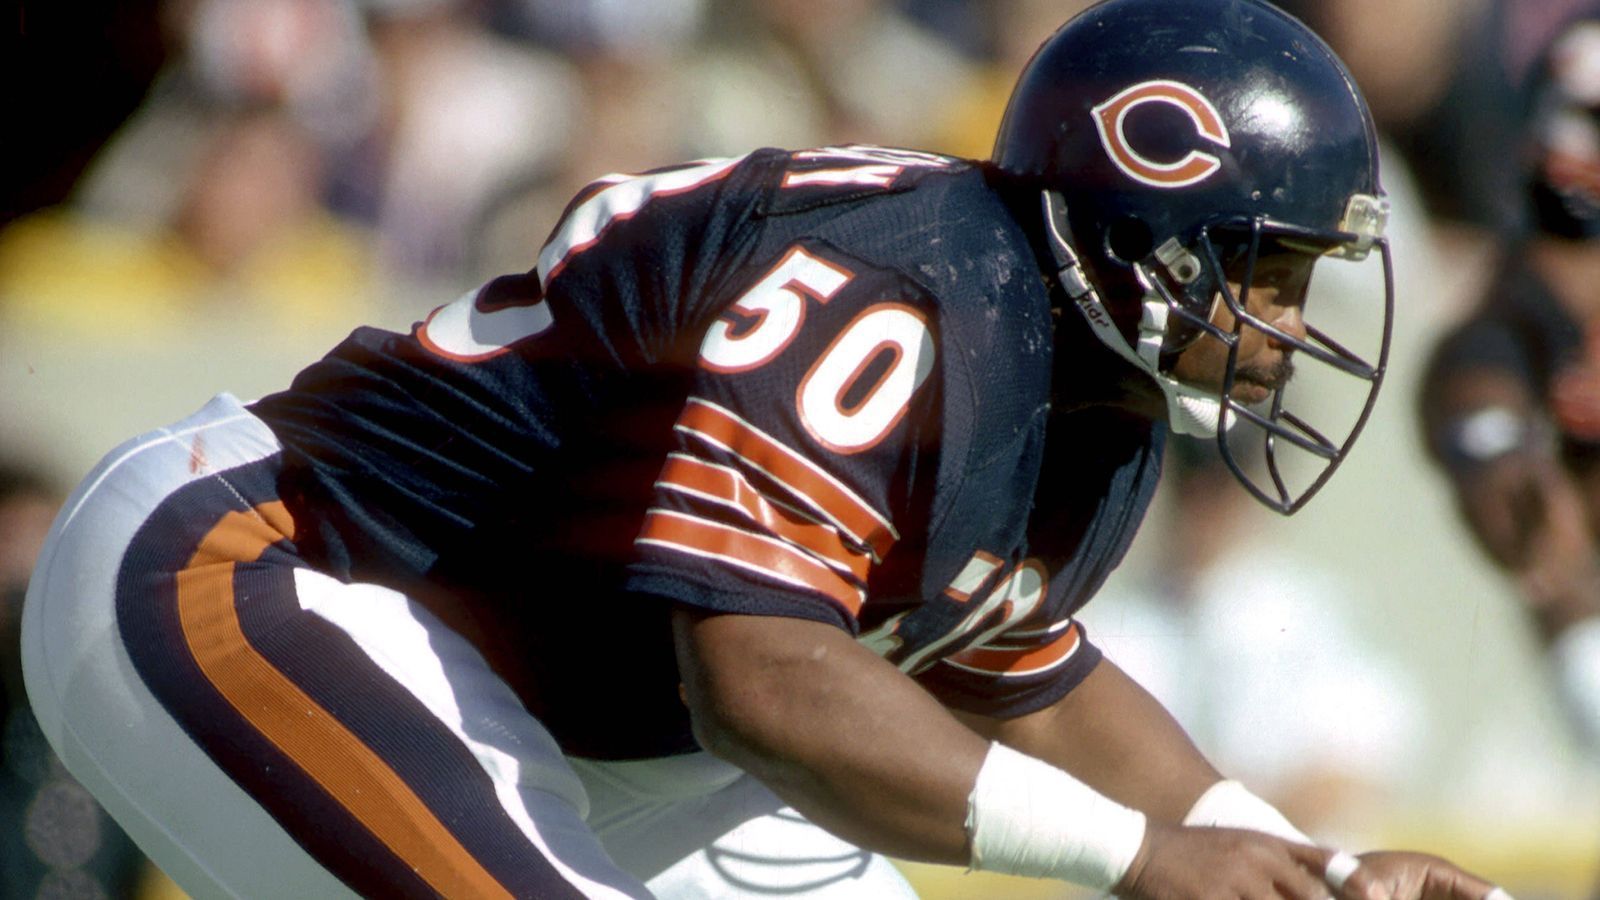 <strong>50: Mike Singletary</strong><br>Team: Chicago Bears<br>Position: Linebacker<br>Erfolge: Pro Football Hall of Famer, Super-Bowl-Champion 1985, zweimaliger NFL Defensive Player of the Year, siebenmaliger First Team All-Pro, zehnmaliger Pro Bowler<br>Honorable Mentions: Alex Wojciechowicz, Justin Houston